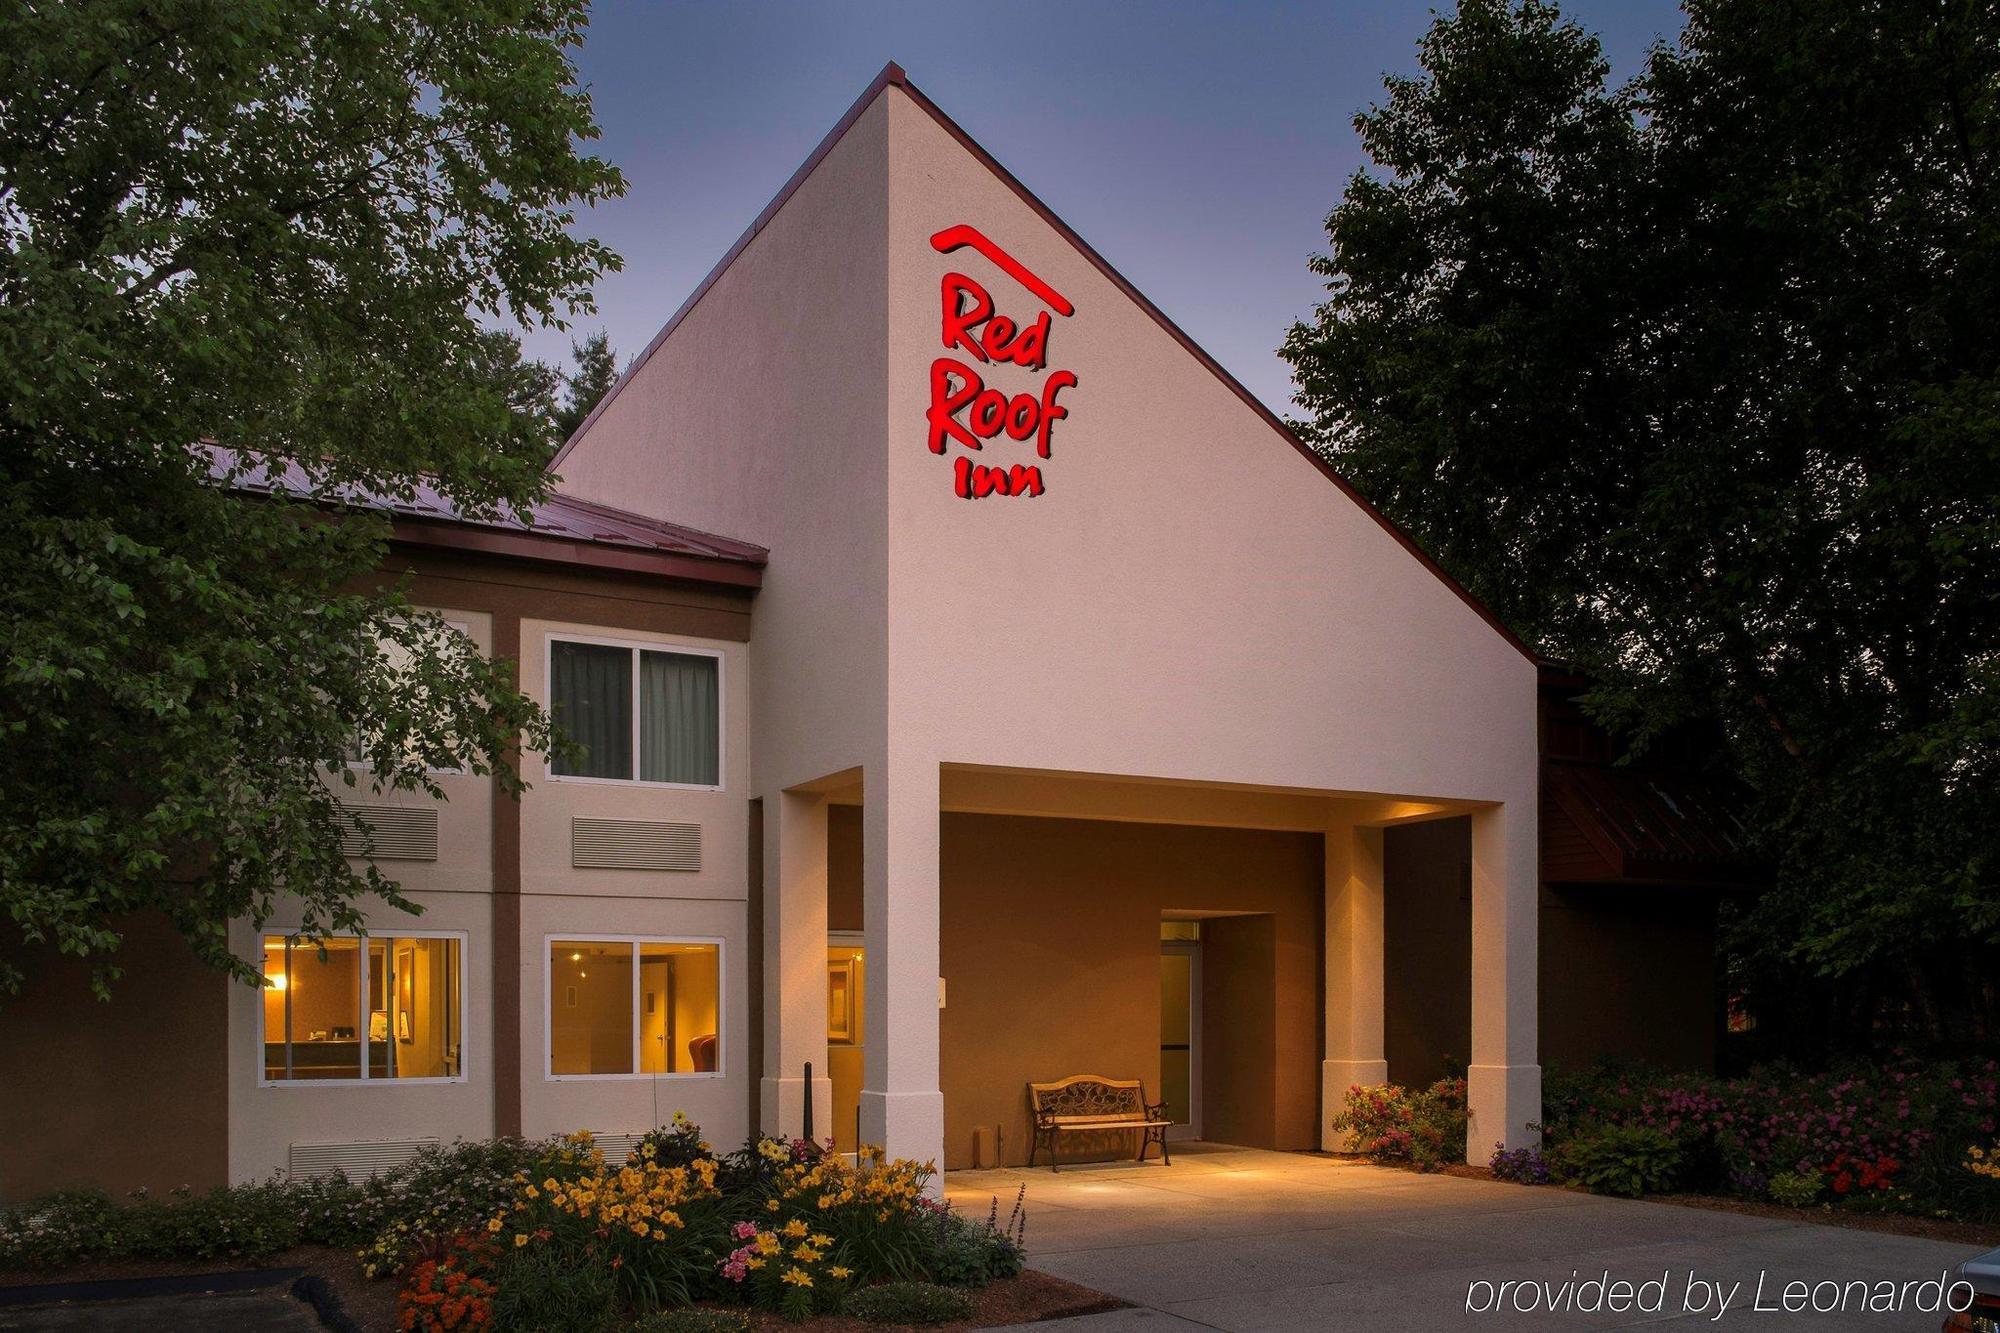 Red Roof Inn Plus+ South Deerfield - Amherst Exterior photo